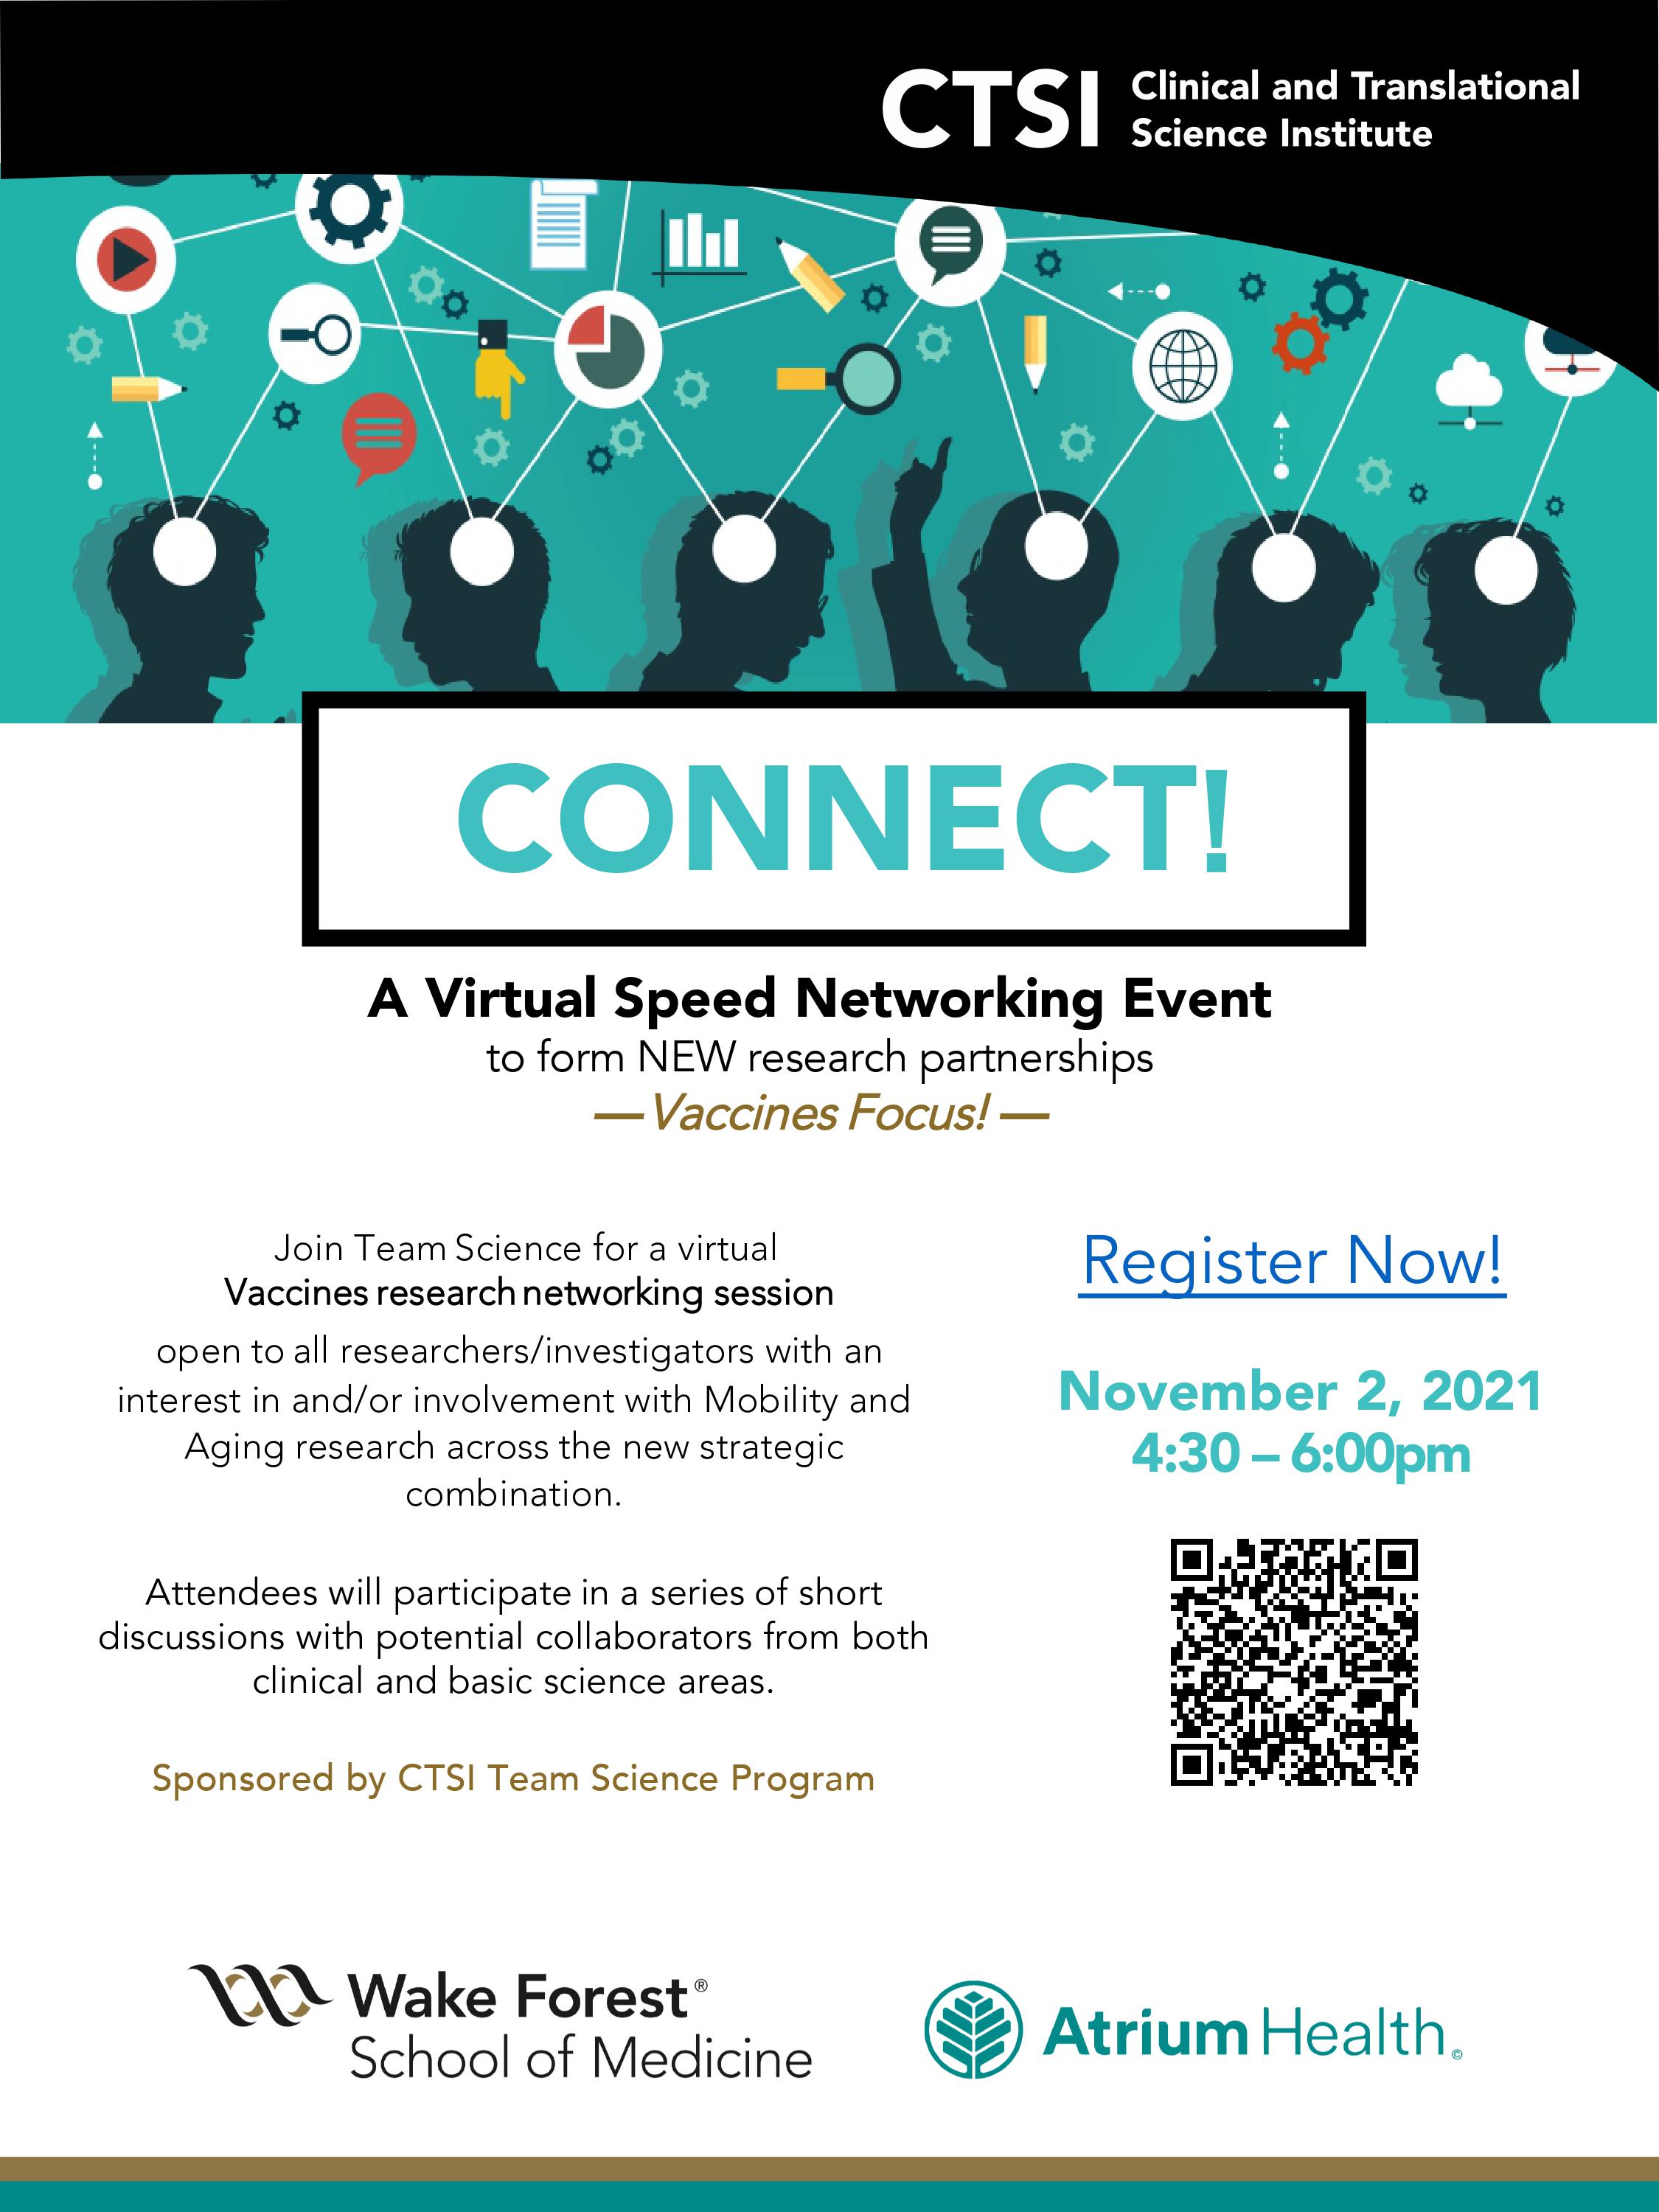 FLYER: CONNECT! A Virtual Speed Networking Event to form NEW research partnerships— Vaccines Focus!— Wake Forest School of Medicine logo / Atrium Health logo